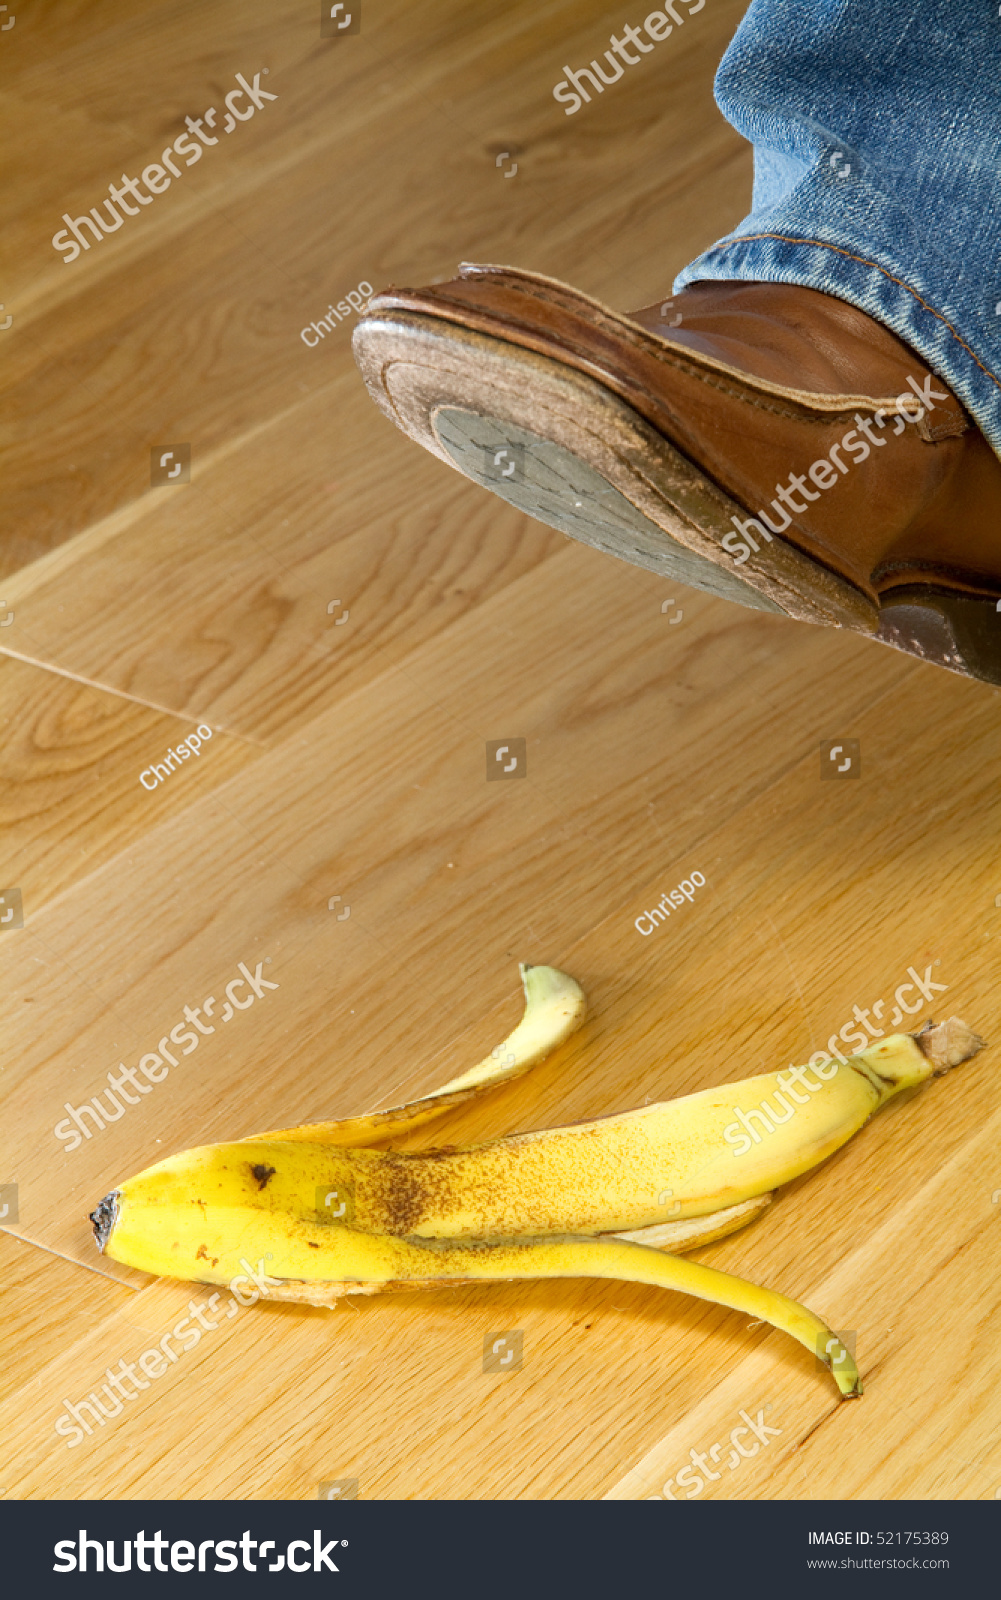 Close Foot About Tread On Banana Stock Photo 52175389 | Shutterstock